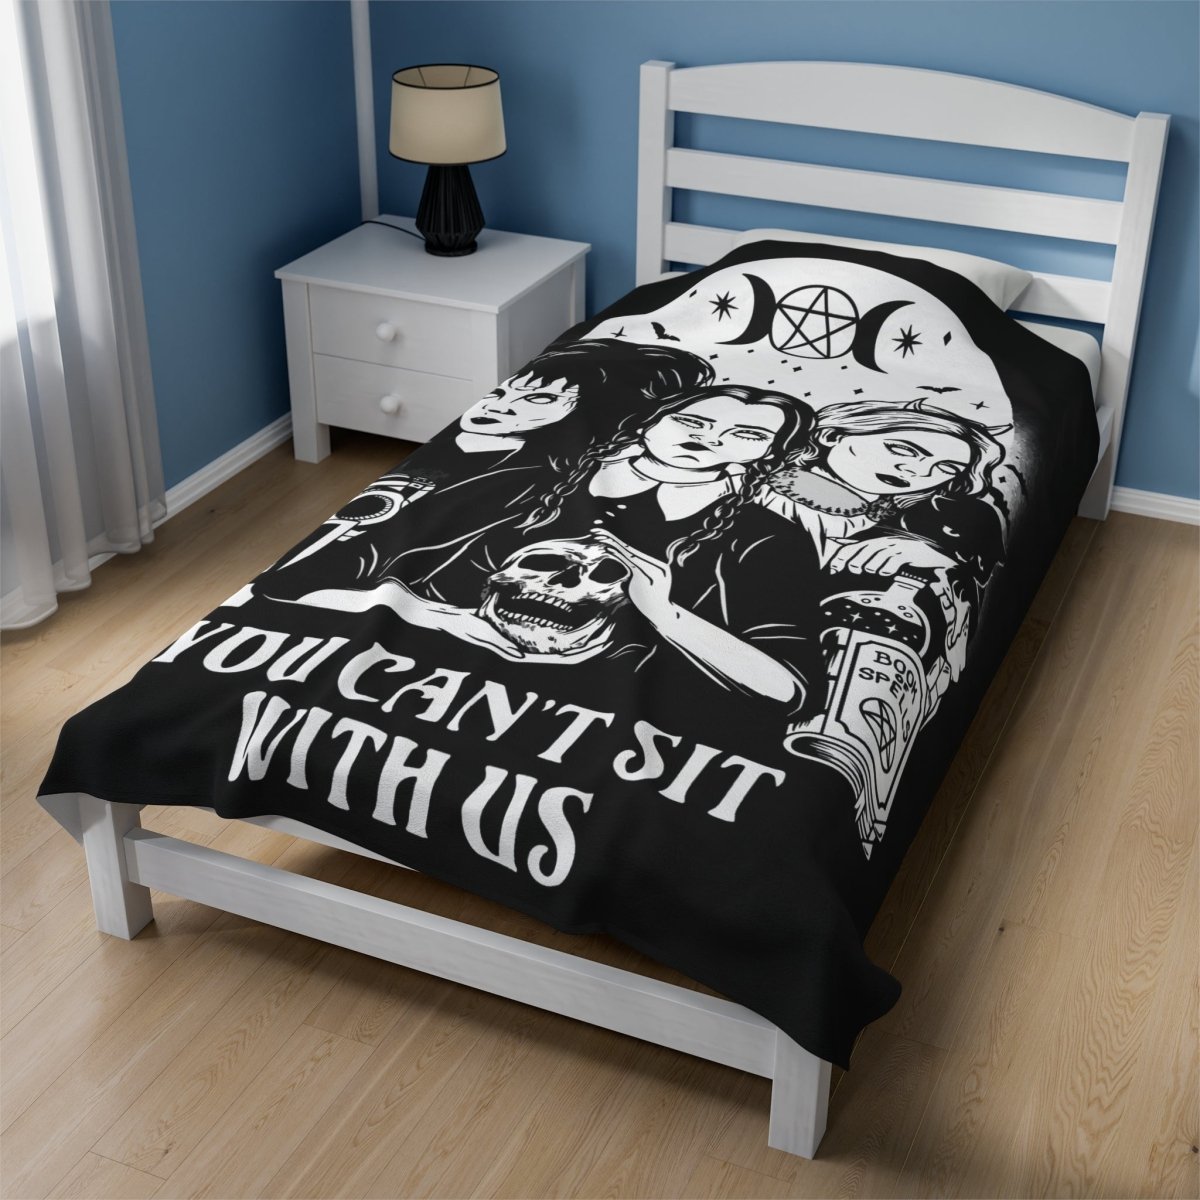 Too Fast | You Can't Sit With Us Creepy Gals Plush Blanket